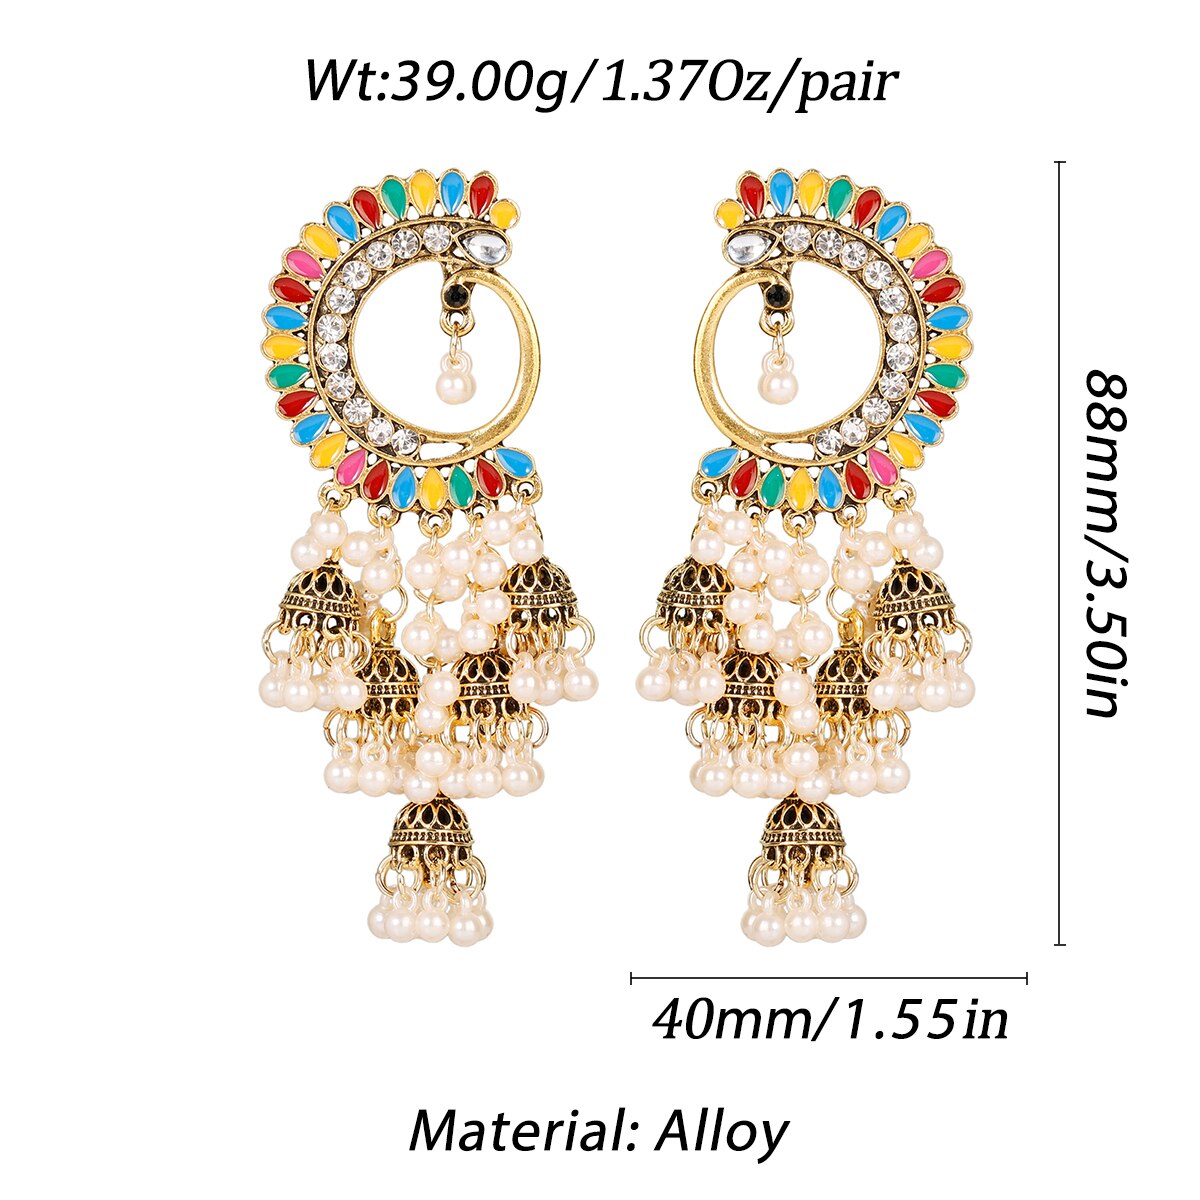 Afghan-Indian-Jewelry-Jhumka-Earrings-For-Women-Gypsy-Gold-Color-Dripping-Oil-Flower-Earrings-Fashio-1005003803870351-6